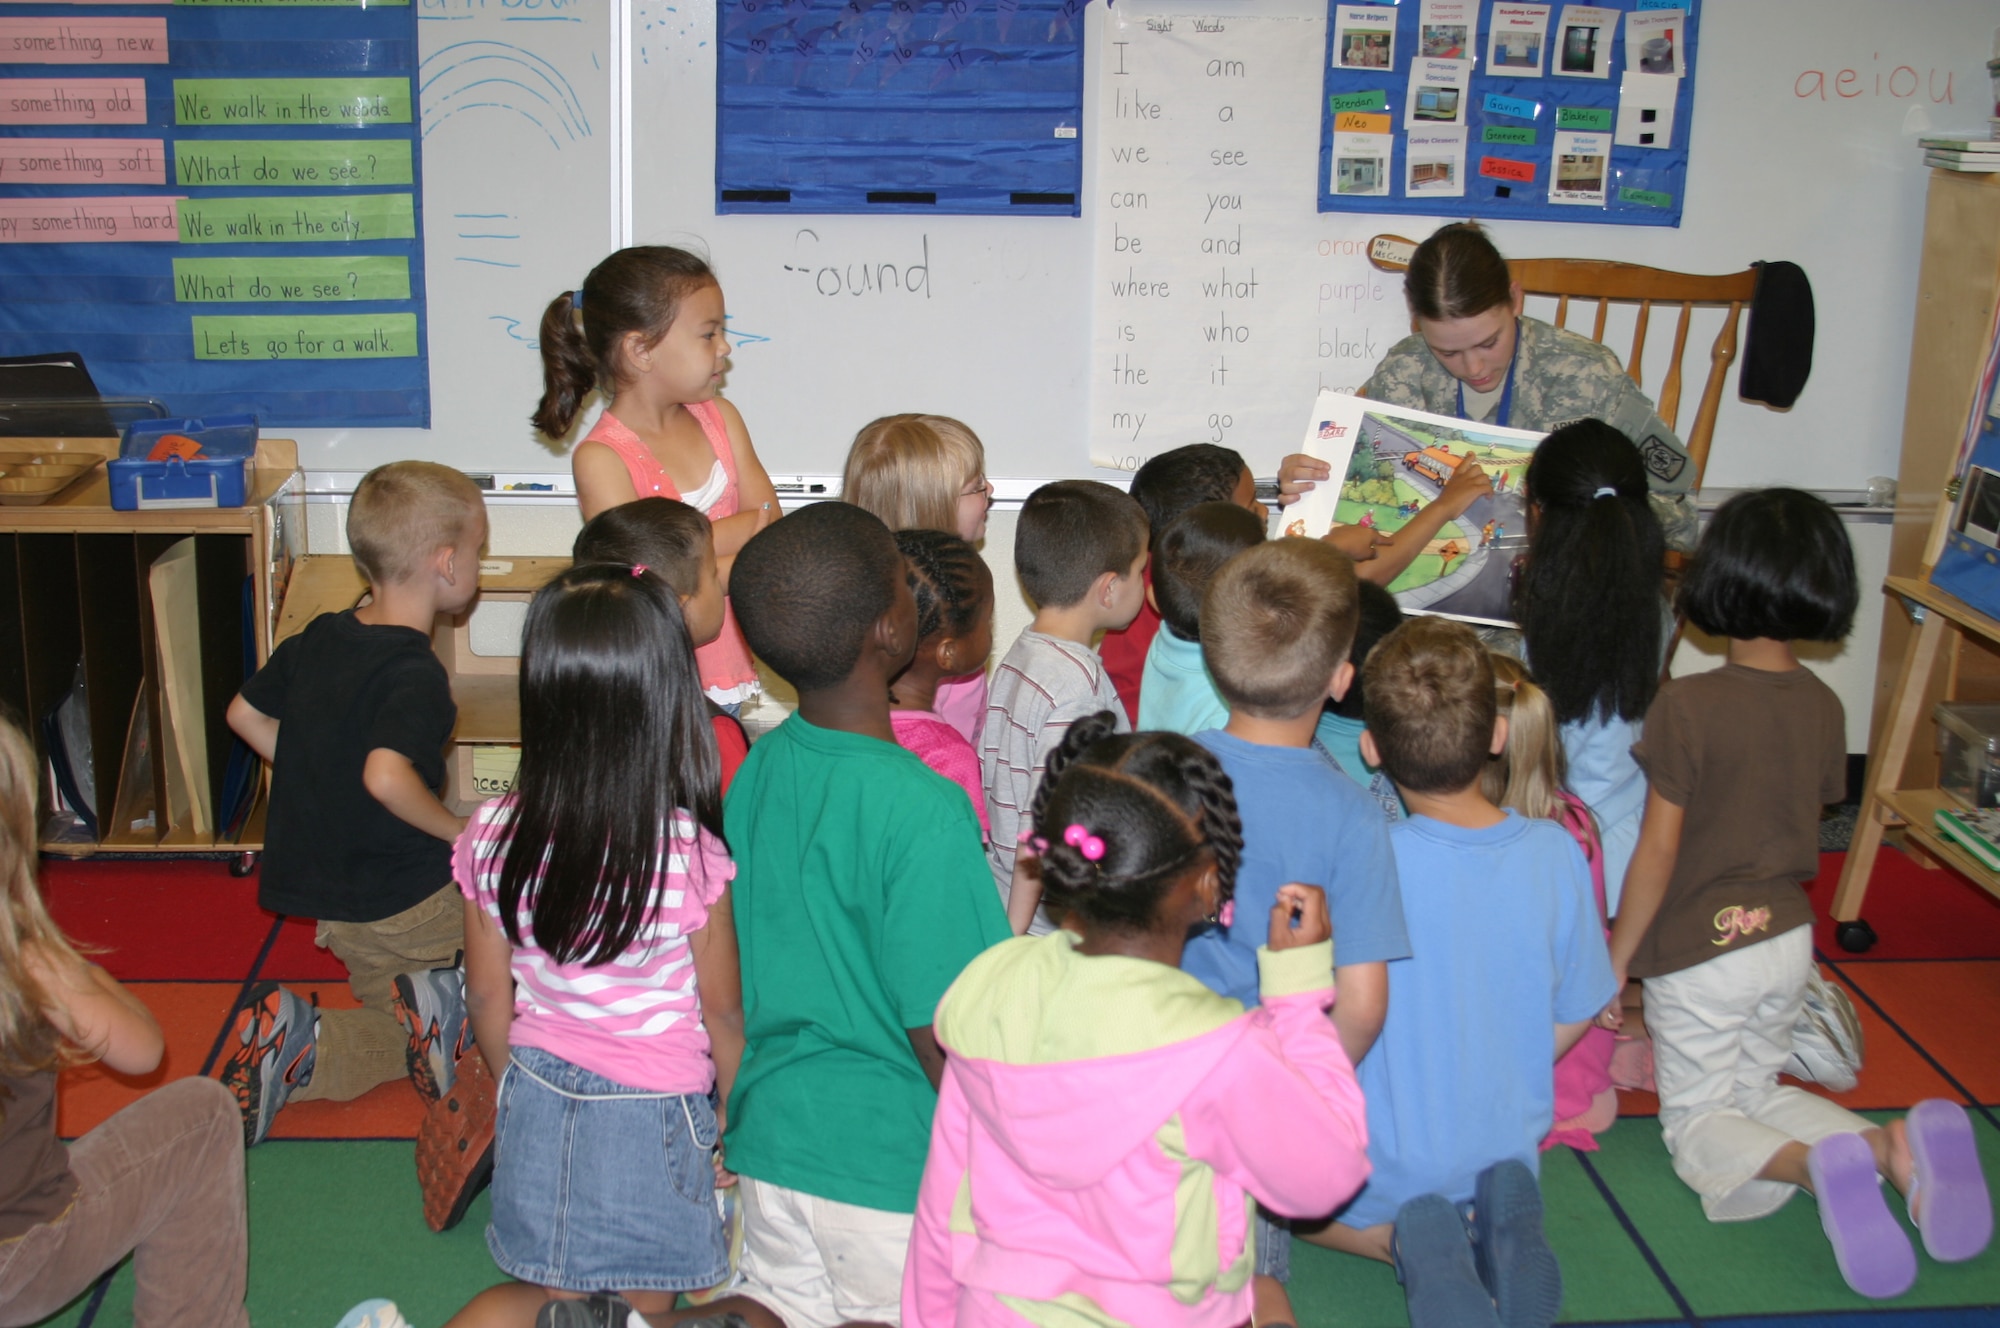 Army Pvt. Brandy Yocum, DARE officer, shows kindergarten students a visual aid during a class on general safety practices at Kadena Air Base, Japan. Military police members from the Army, Navy and Marines taught students at base schools May 17 the skills they need to avoid involvement in drugs, gangs, and violence. The classes were taught as part of the Drug Abuse Resistance Education program.
(U.S. Air Force/Senior Airman Nestor Cruz)